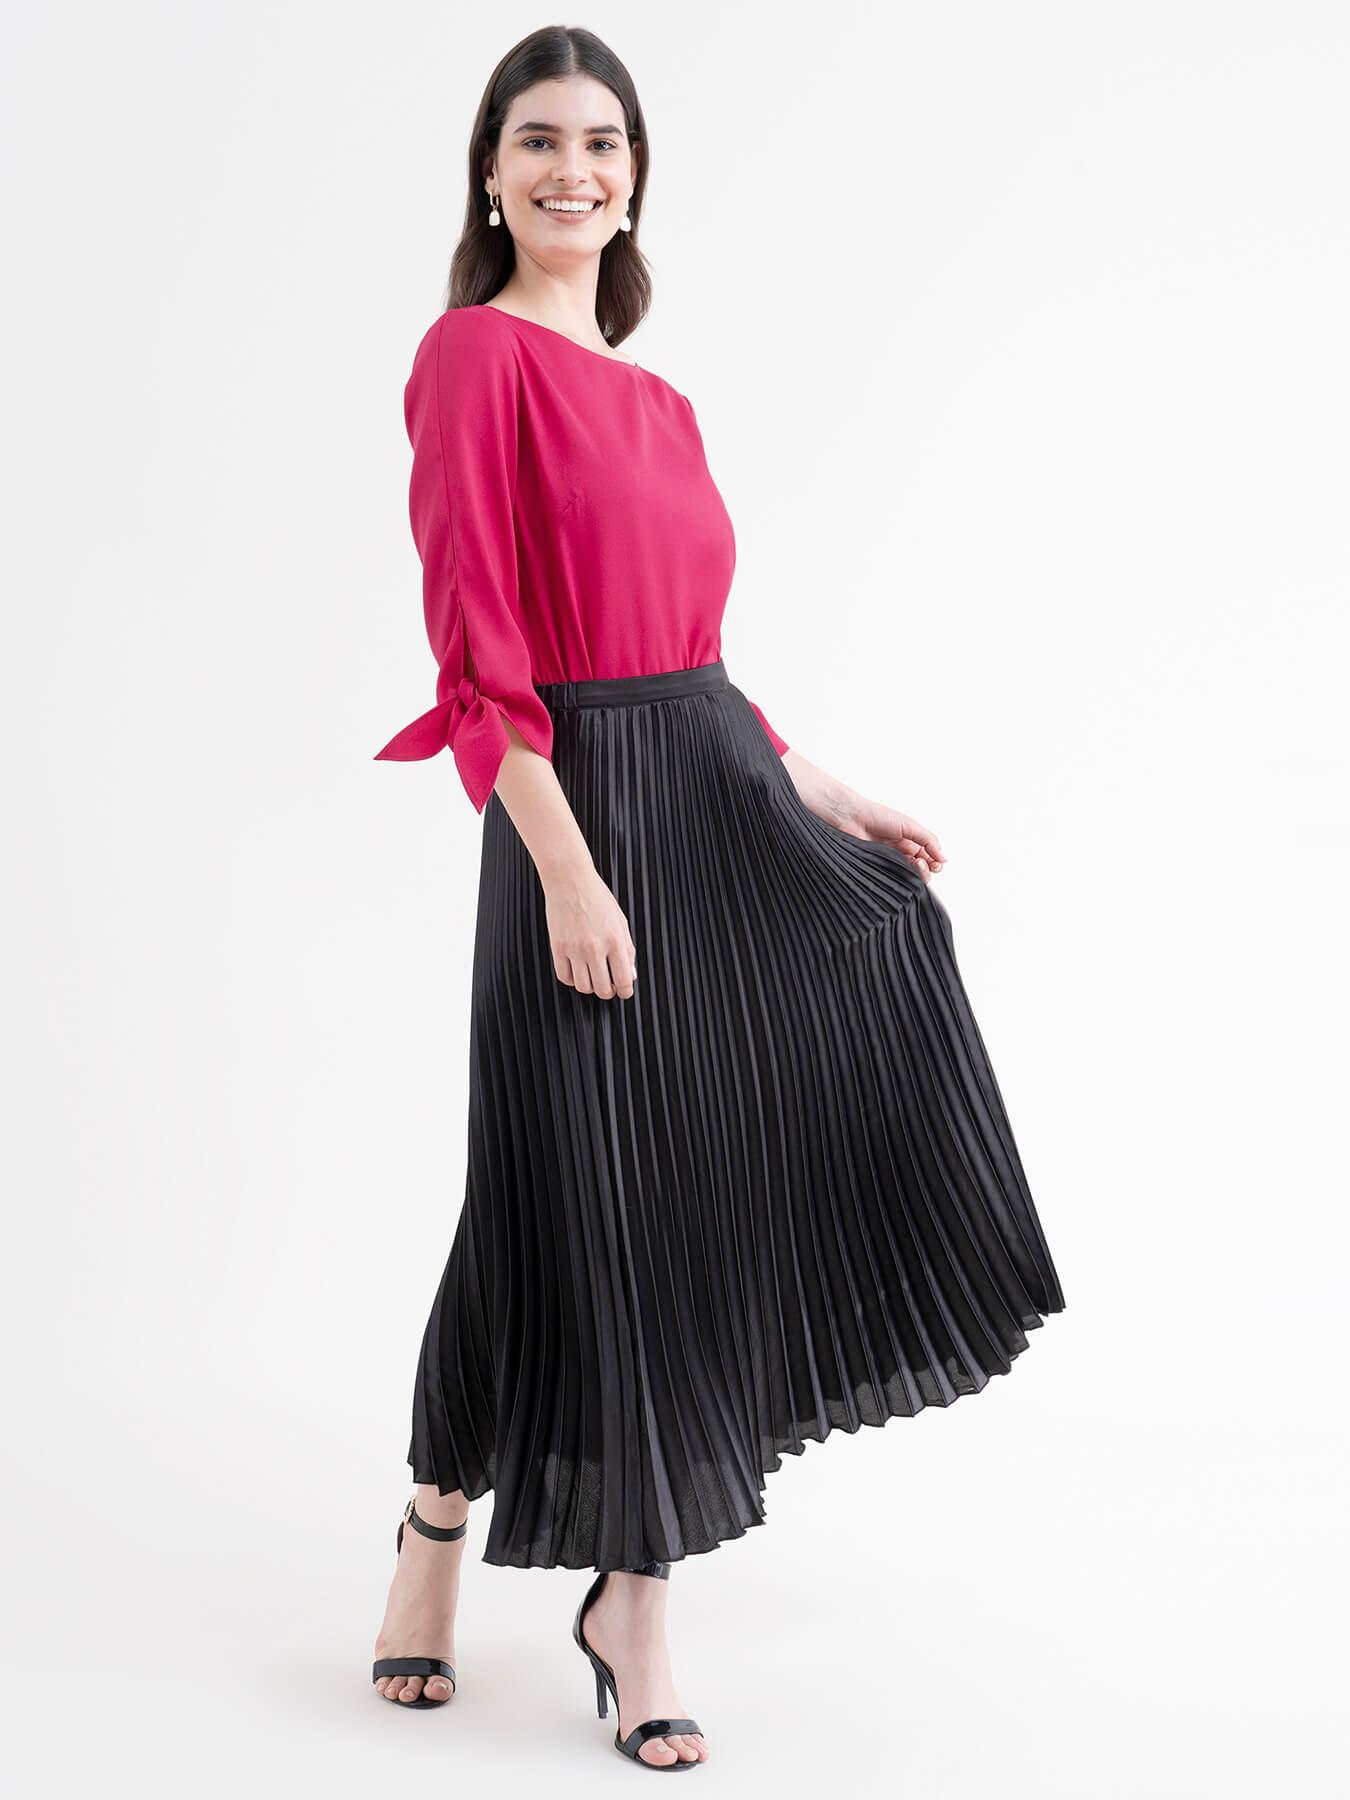 Boat Neck Tie Up Sleeve Top - Fuchsia| Formal Tops